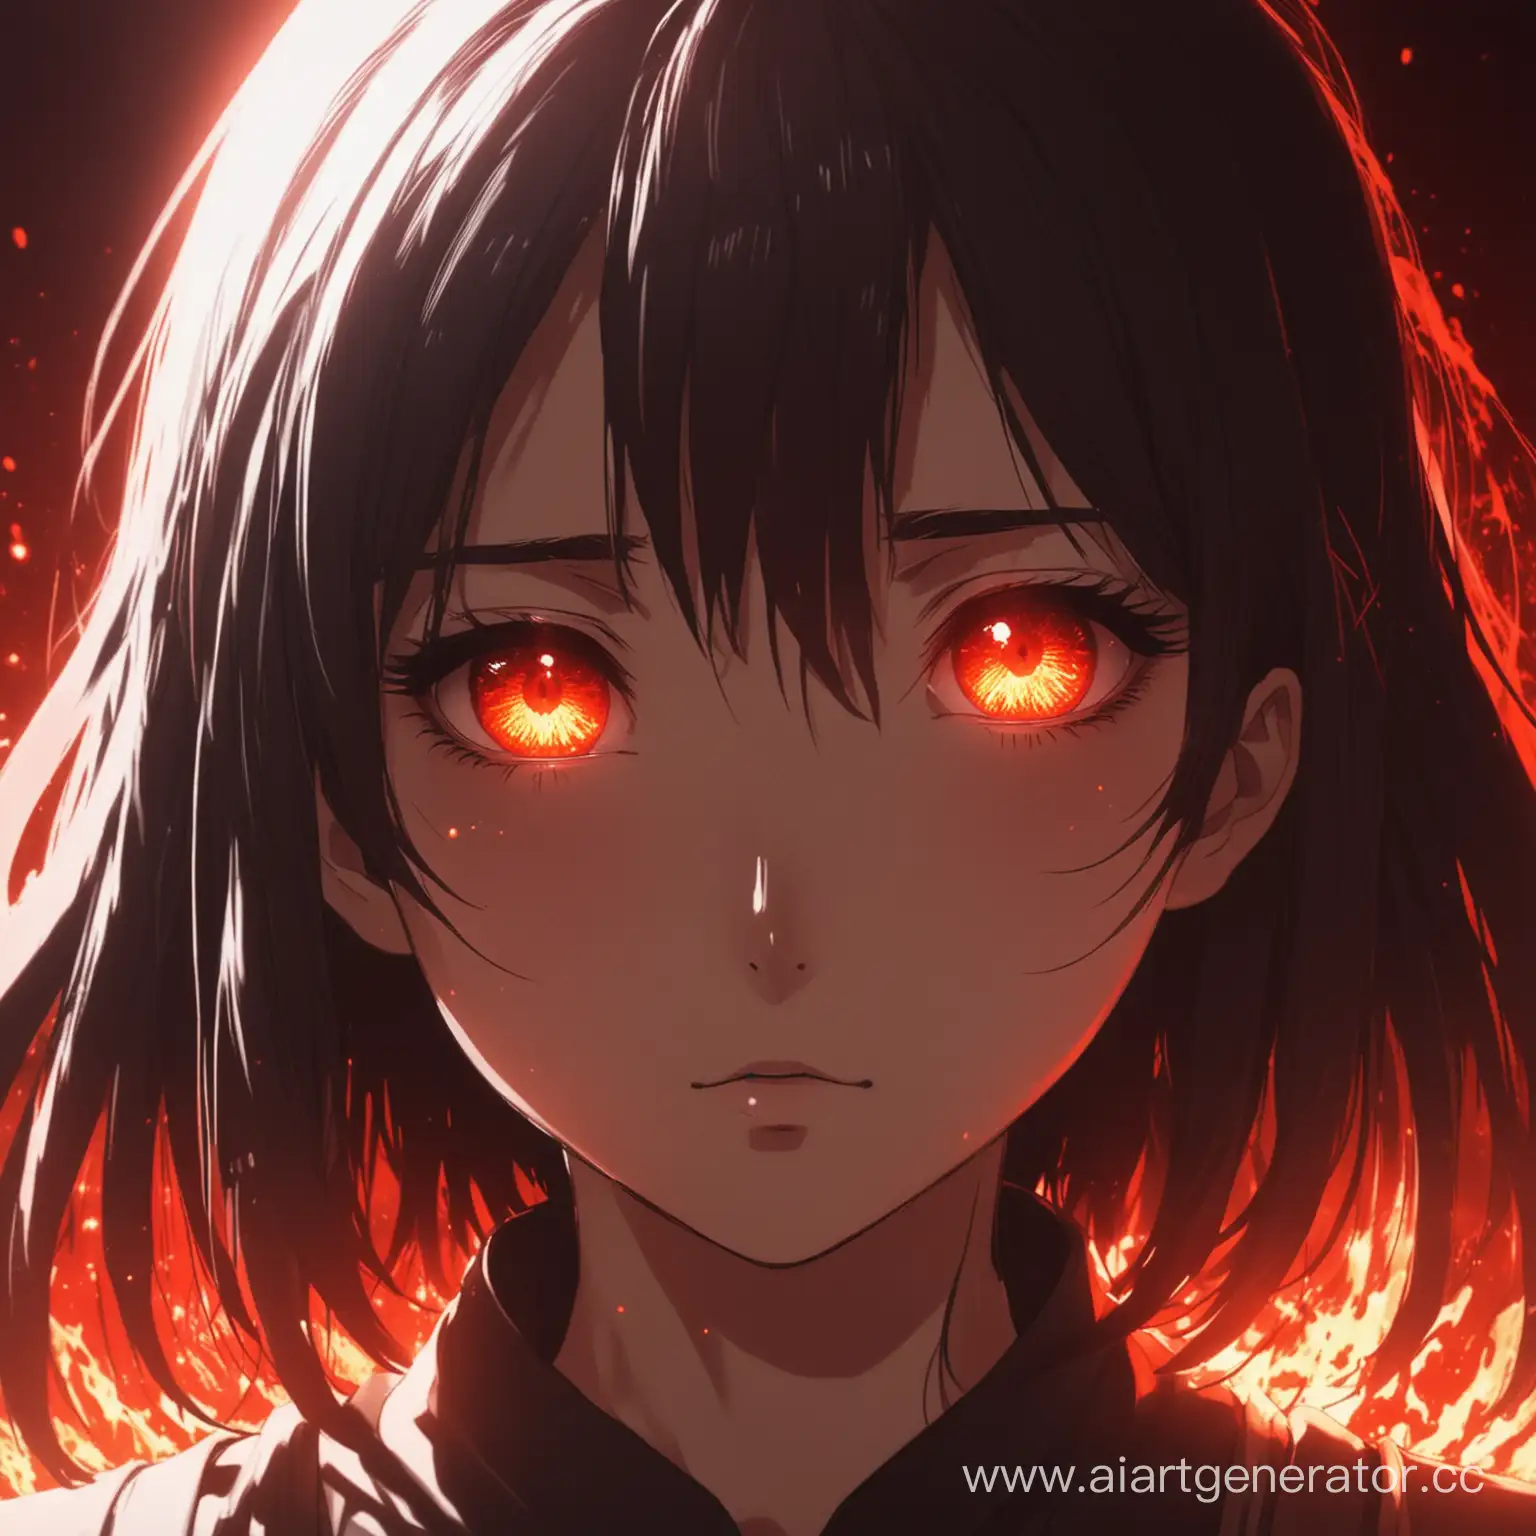 Sinister-Anime-Girl-with-Fiery-Red-Aura-and-Glowing-Eyes